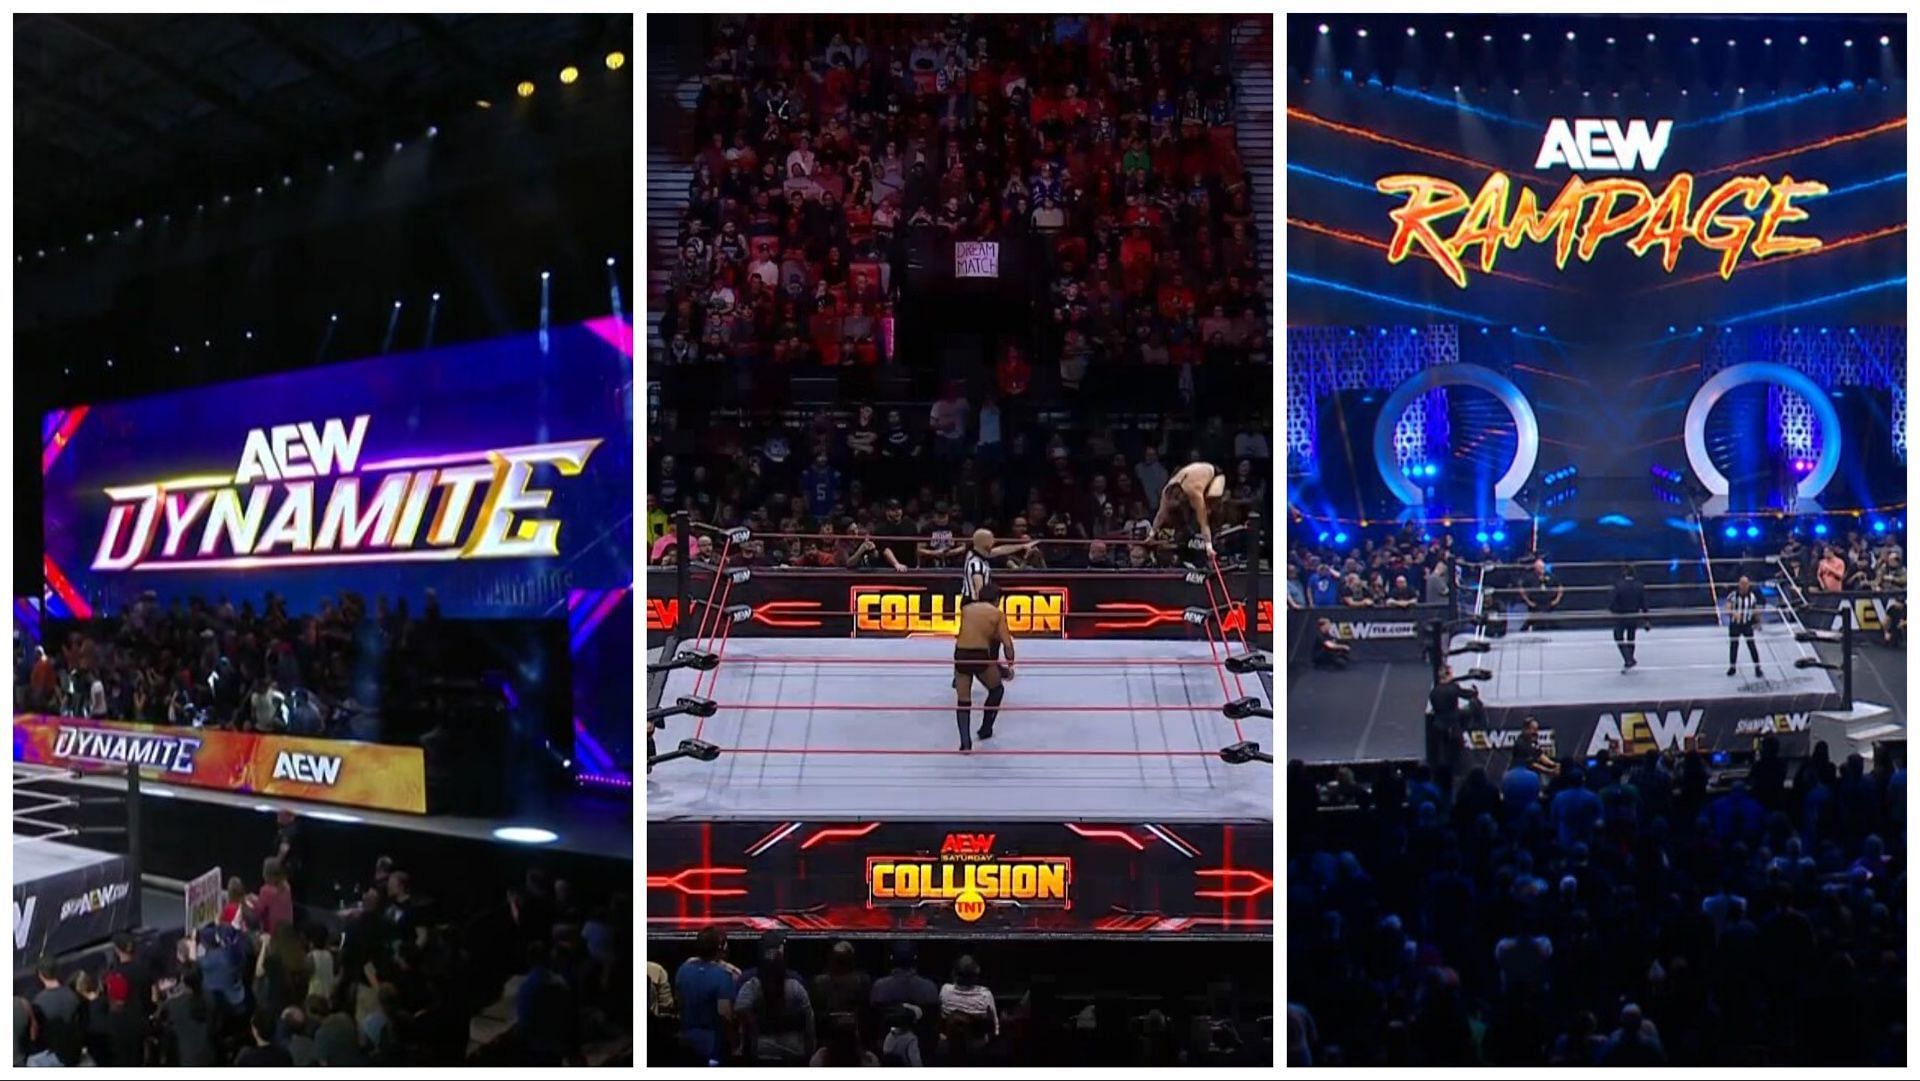 A look at the sets for AEW Dynamite, Rampage, Collision